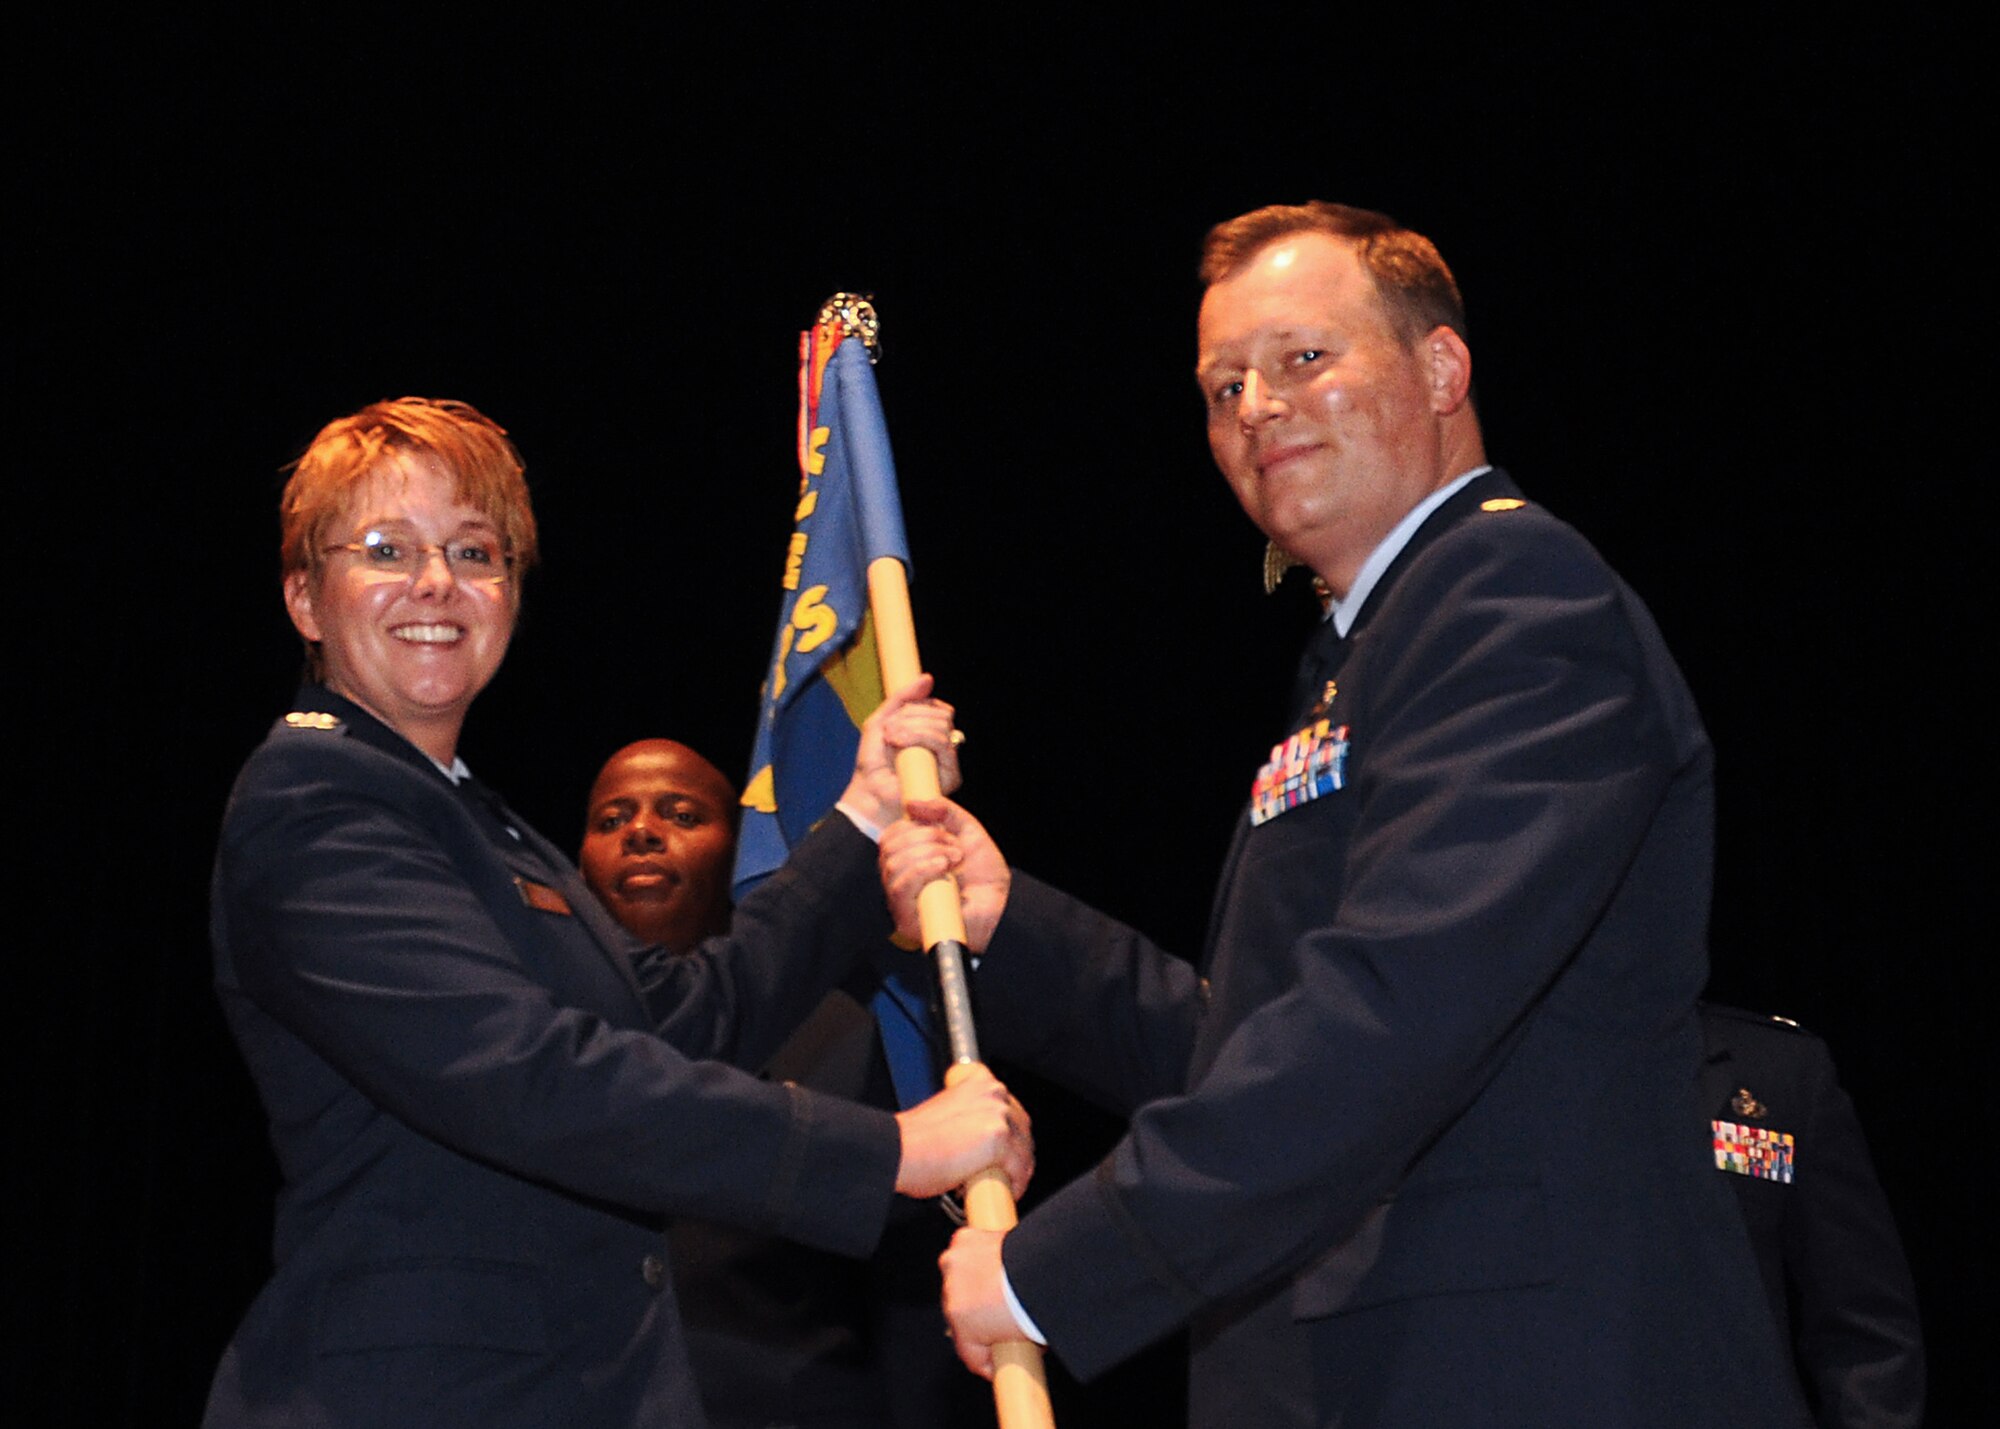 Col. Cherie Roff, 315th Mission Support commander, passes the guidon to Maj. Thomas Klauer, new 81st Aerial Port Squadron commander, during an change of command ceremony at Joint Base Charleston, S.C. Sept. 13, 2015. (U.S. Air Force Photo by Senior Airman Tom Brading)